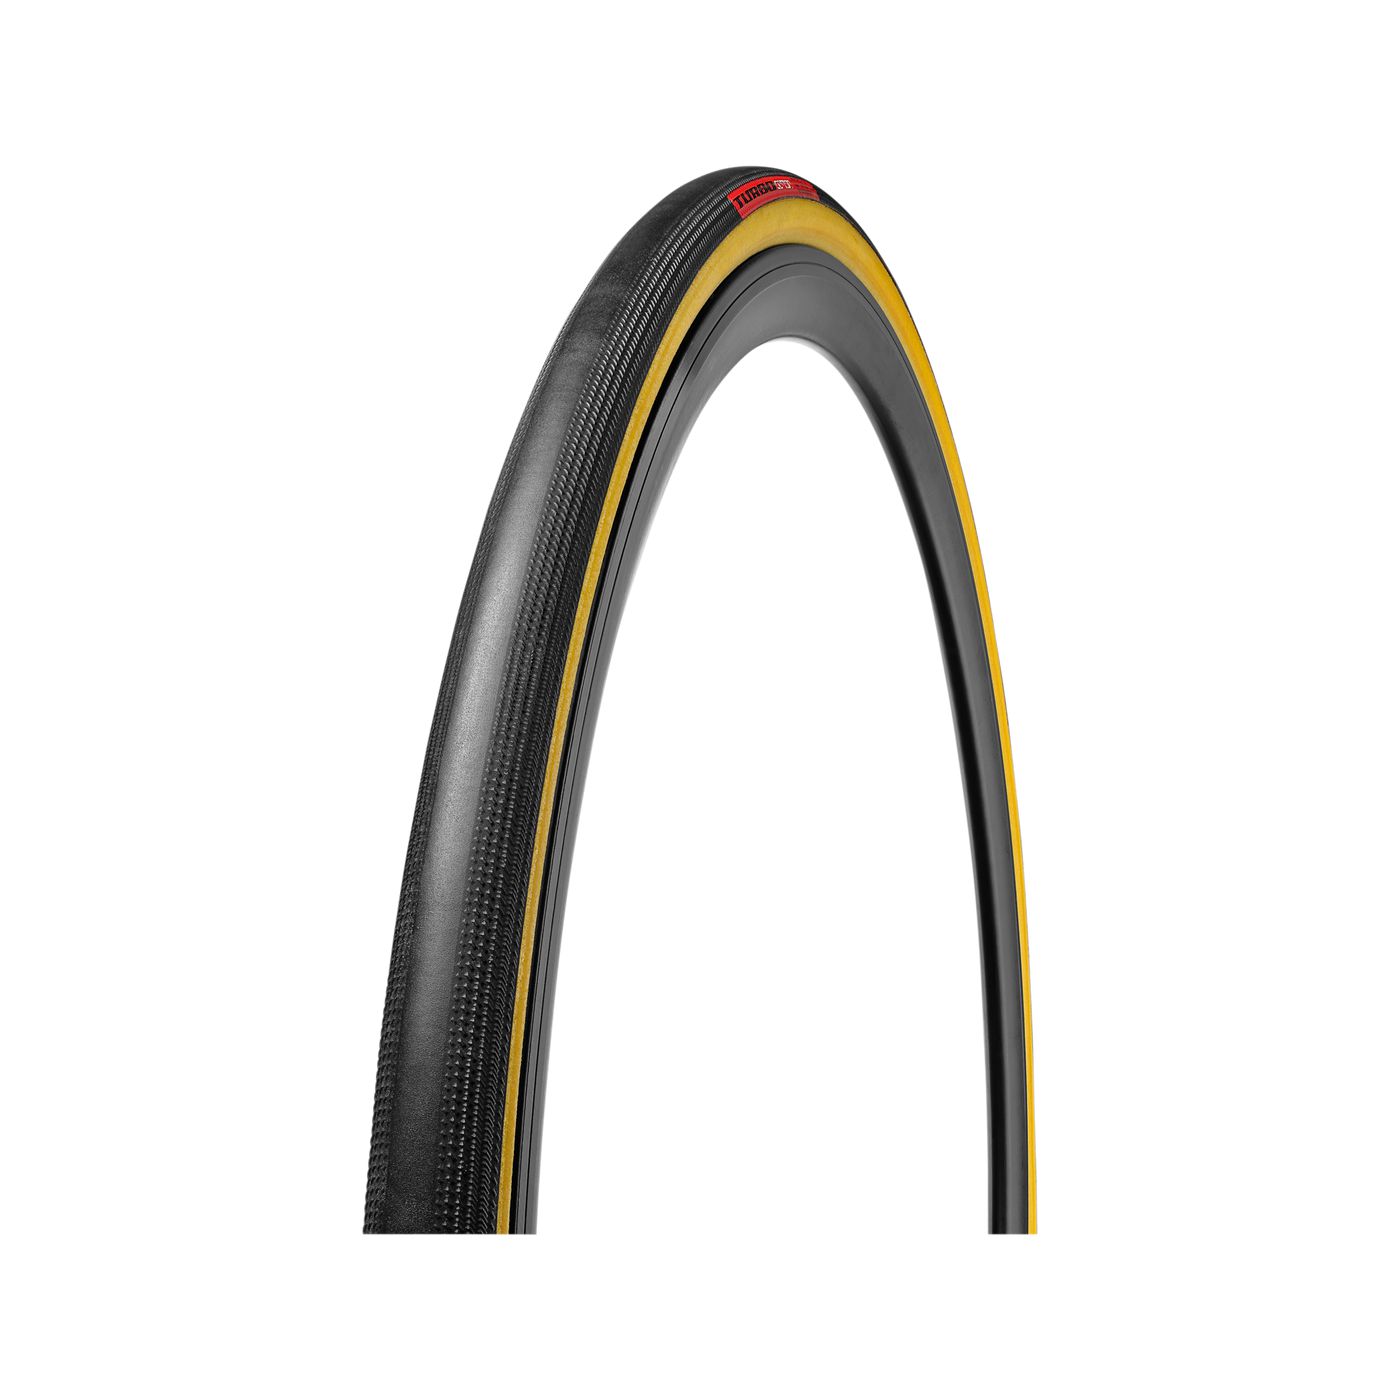 Specialized Turbo Cotton 700c Road Bike Tire - Tires - Bicycle Warehouse